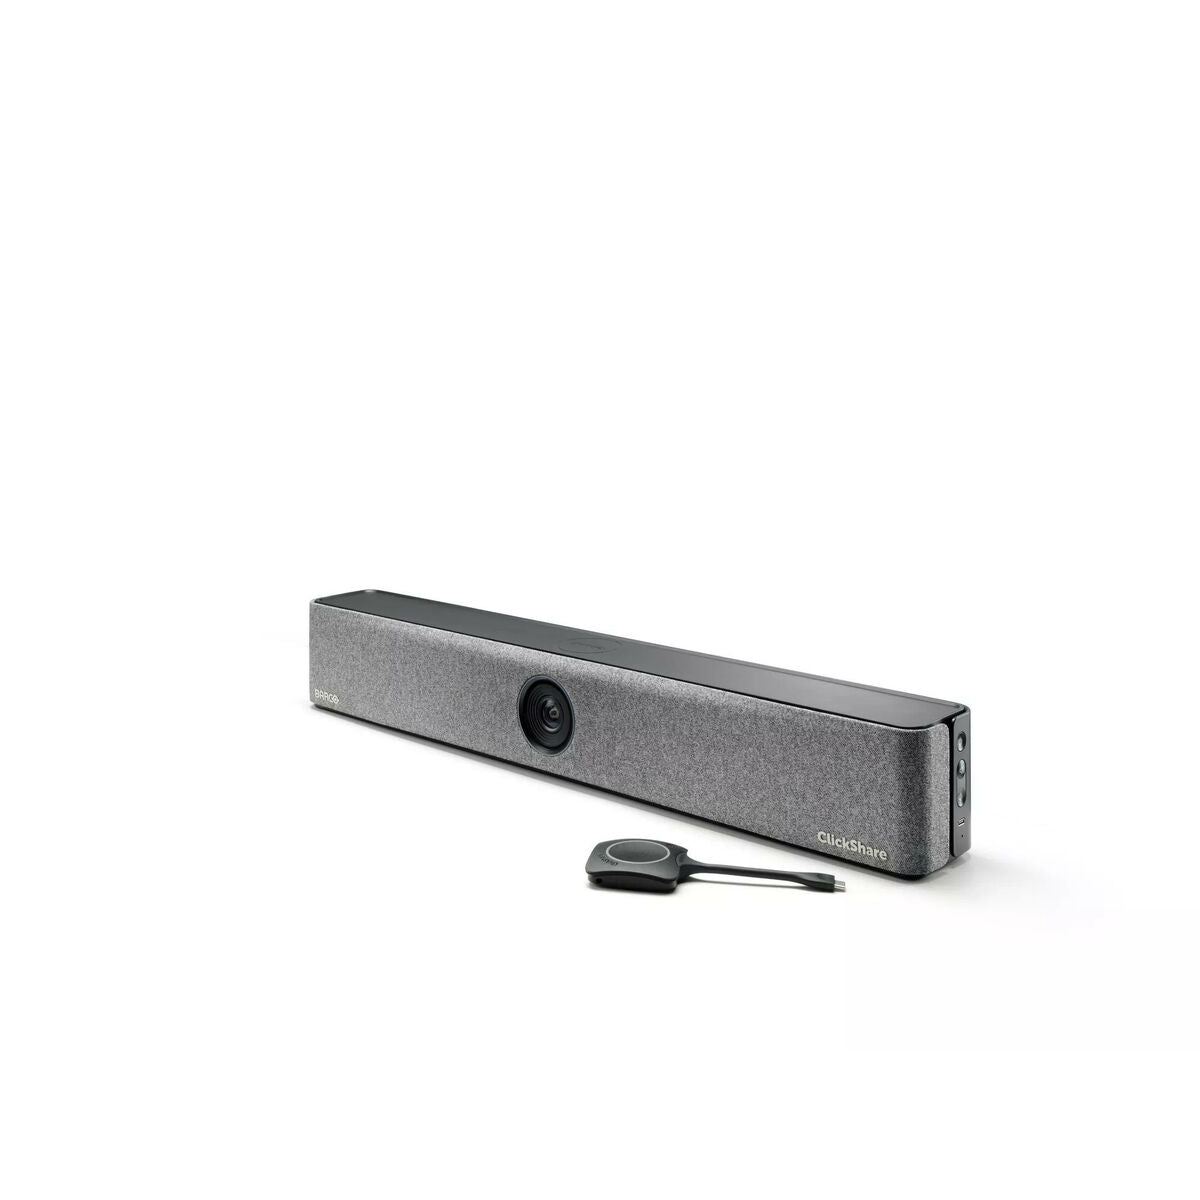 Video Conferencing System Barco R9861632EUB1 4K Ultra HD, Barco, Computing, Accessories, video-conferencing-system-barco-r9861632eub1-4k-ultra-hd, Brand_Barco, category-reference-2609, category-reference-2642, category-reference-2844, category-reference-t-19685, category-reference-t-19908, category-reference-t-21340, category-reference-t-25568, computers / peripherals, Condition_NEW, office, Price_+ 1000, Teleworking, RiotNook